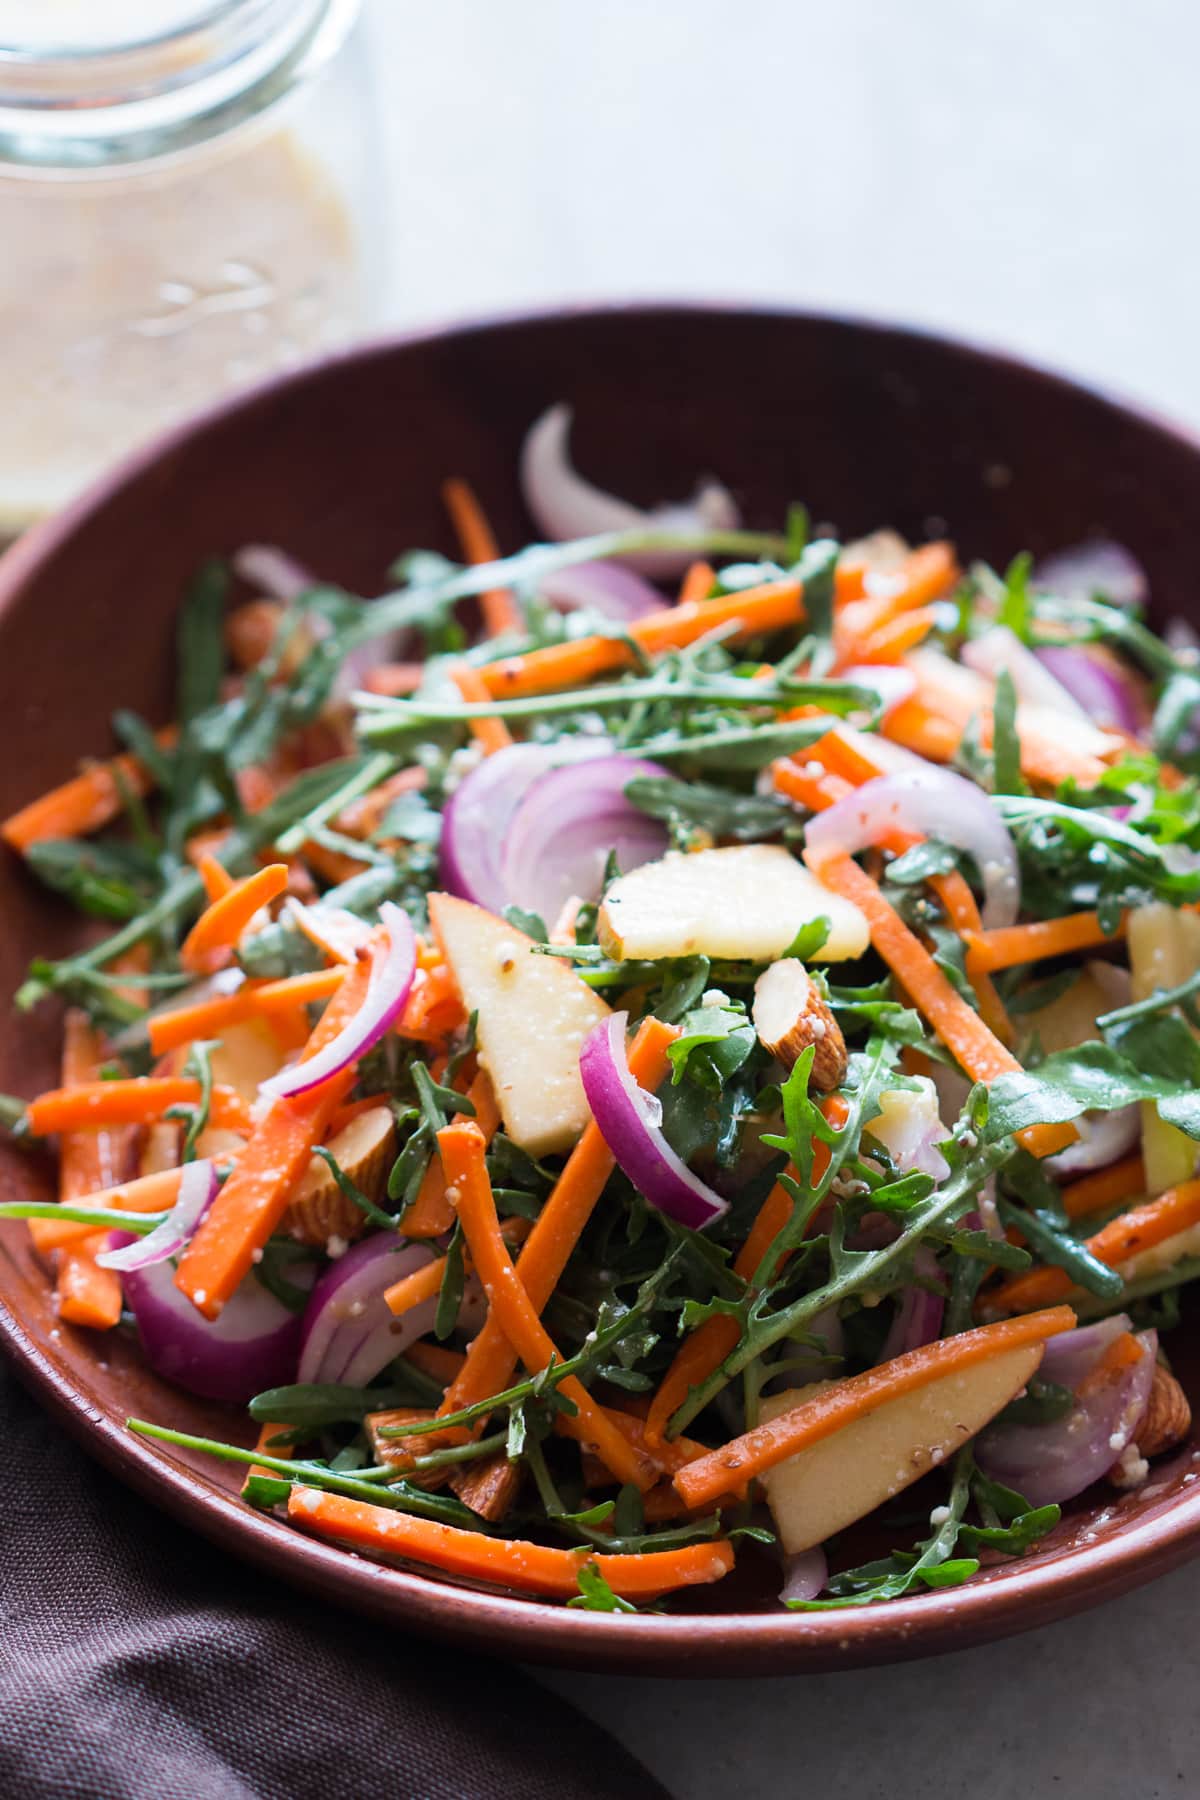 Apple Arugula Almond Salad with Orange Dressing is a healthy, spunky fall salad that takes minutes to put together and tastes delicious!